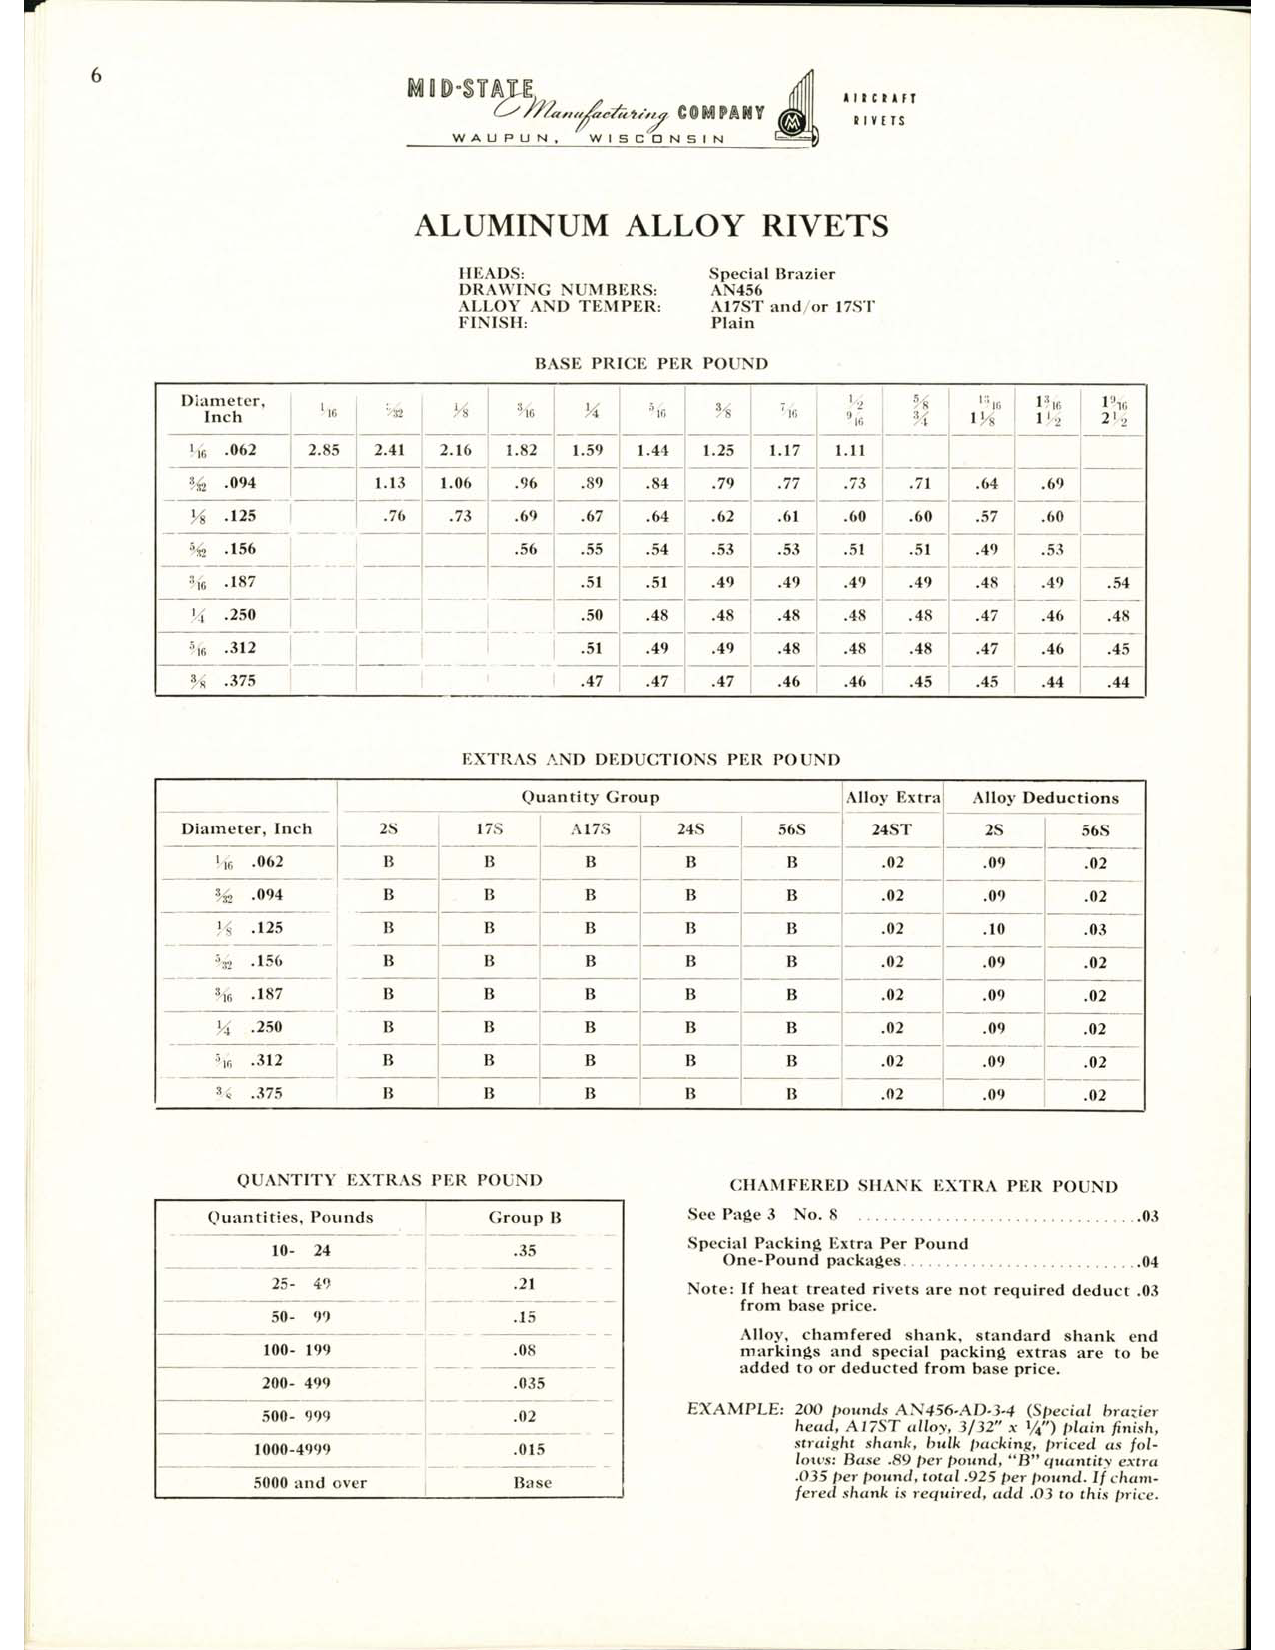 Sample page 6 from AirCorps Library document: Aircraft Rivets - Mid-State Manufacturing Co